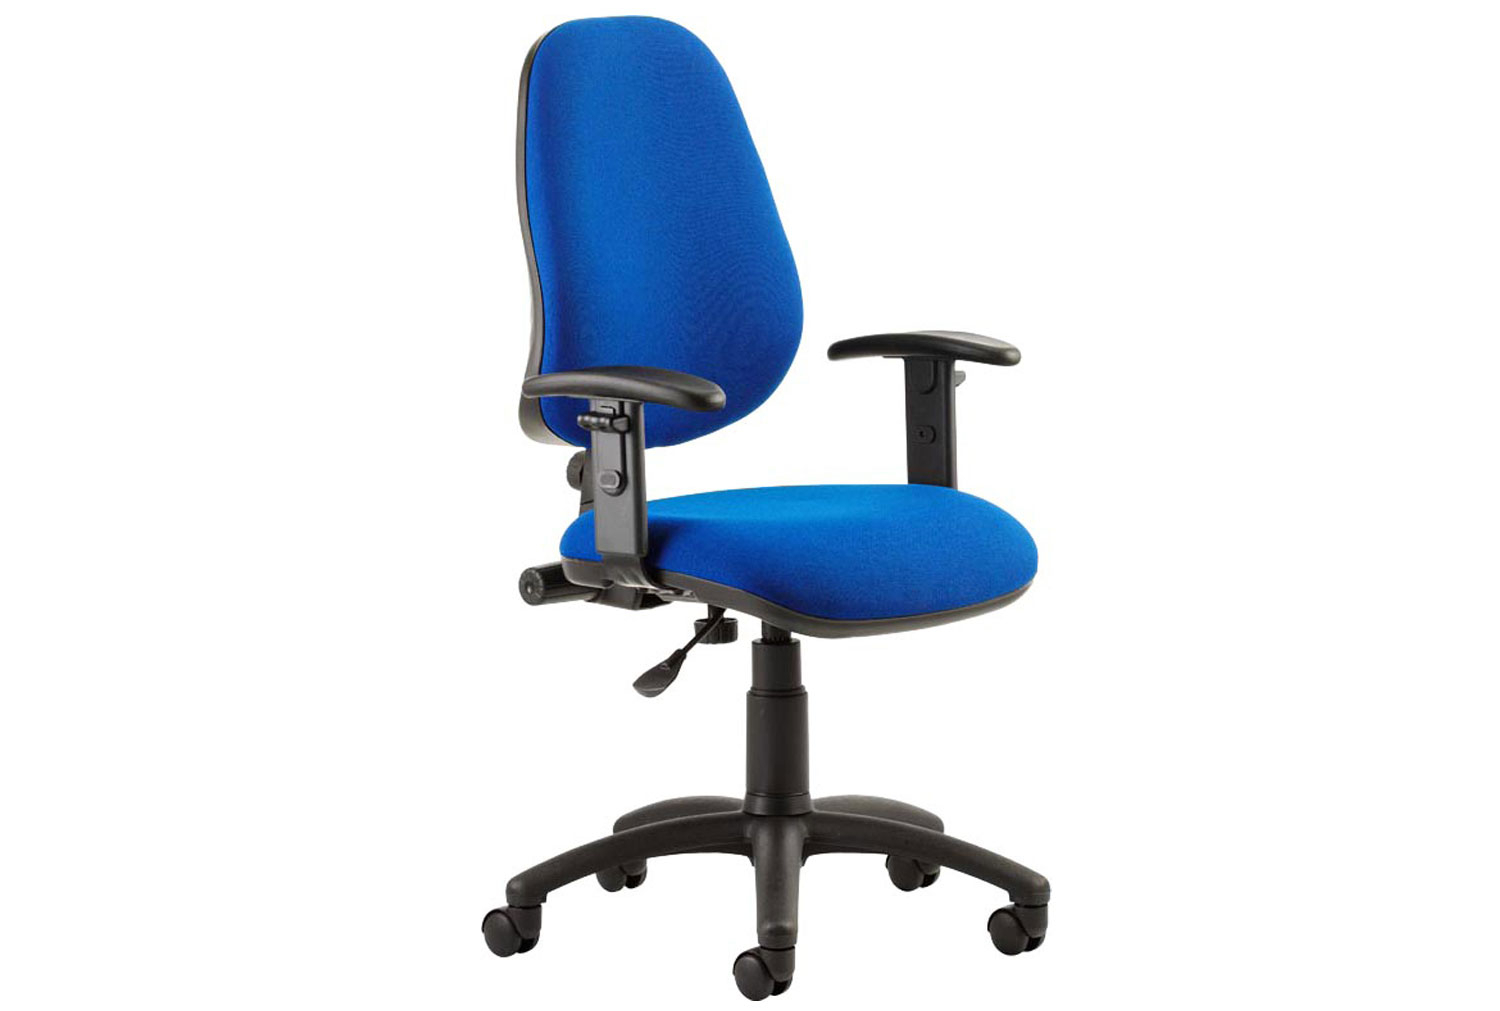 Lunar 1 Lever Operator Office Chair With Height Adjustable Arms, Blue, Express Delivery